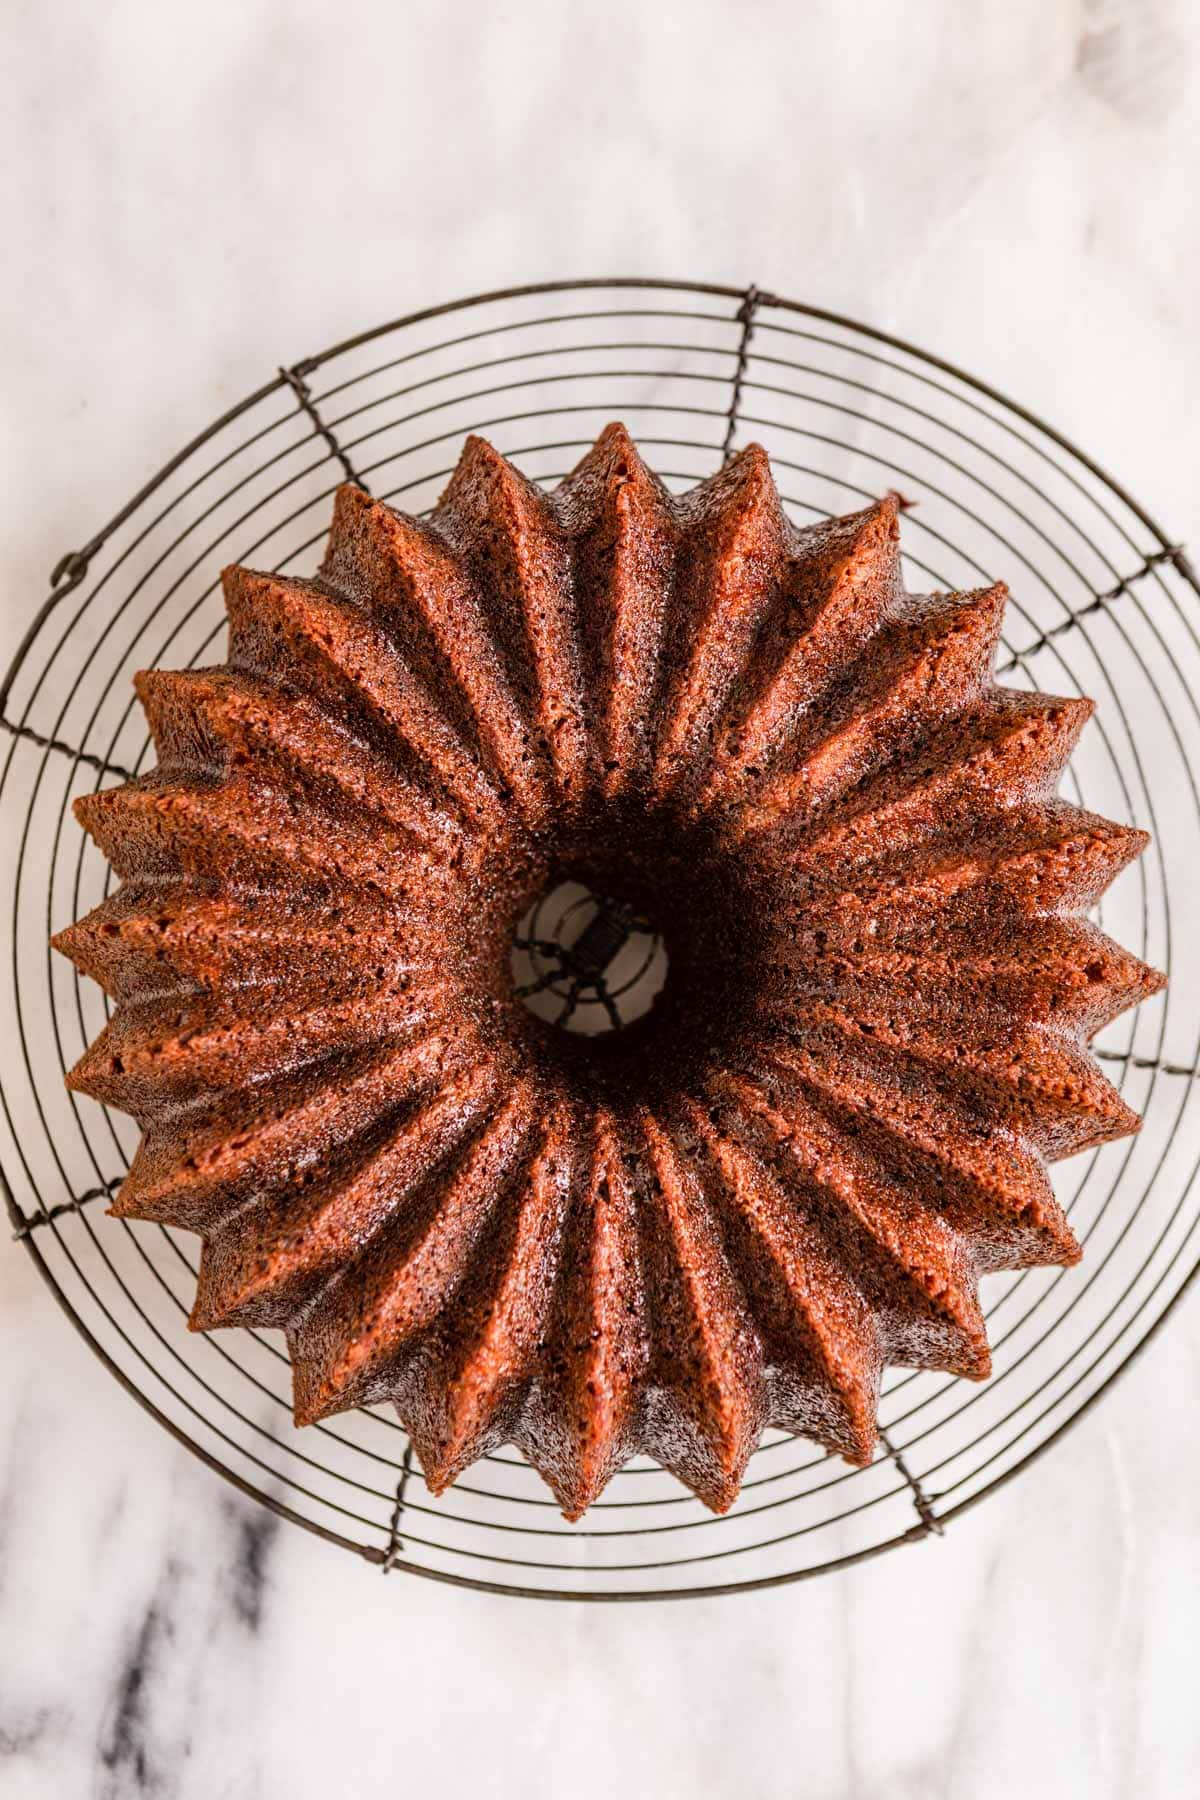 Banana Bundt Cake baked cake inverted on wire cooling rack, view from above